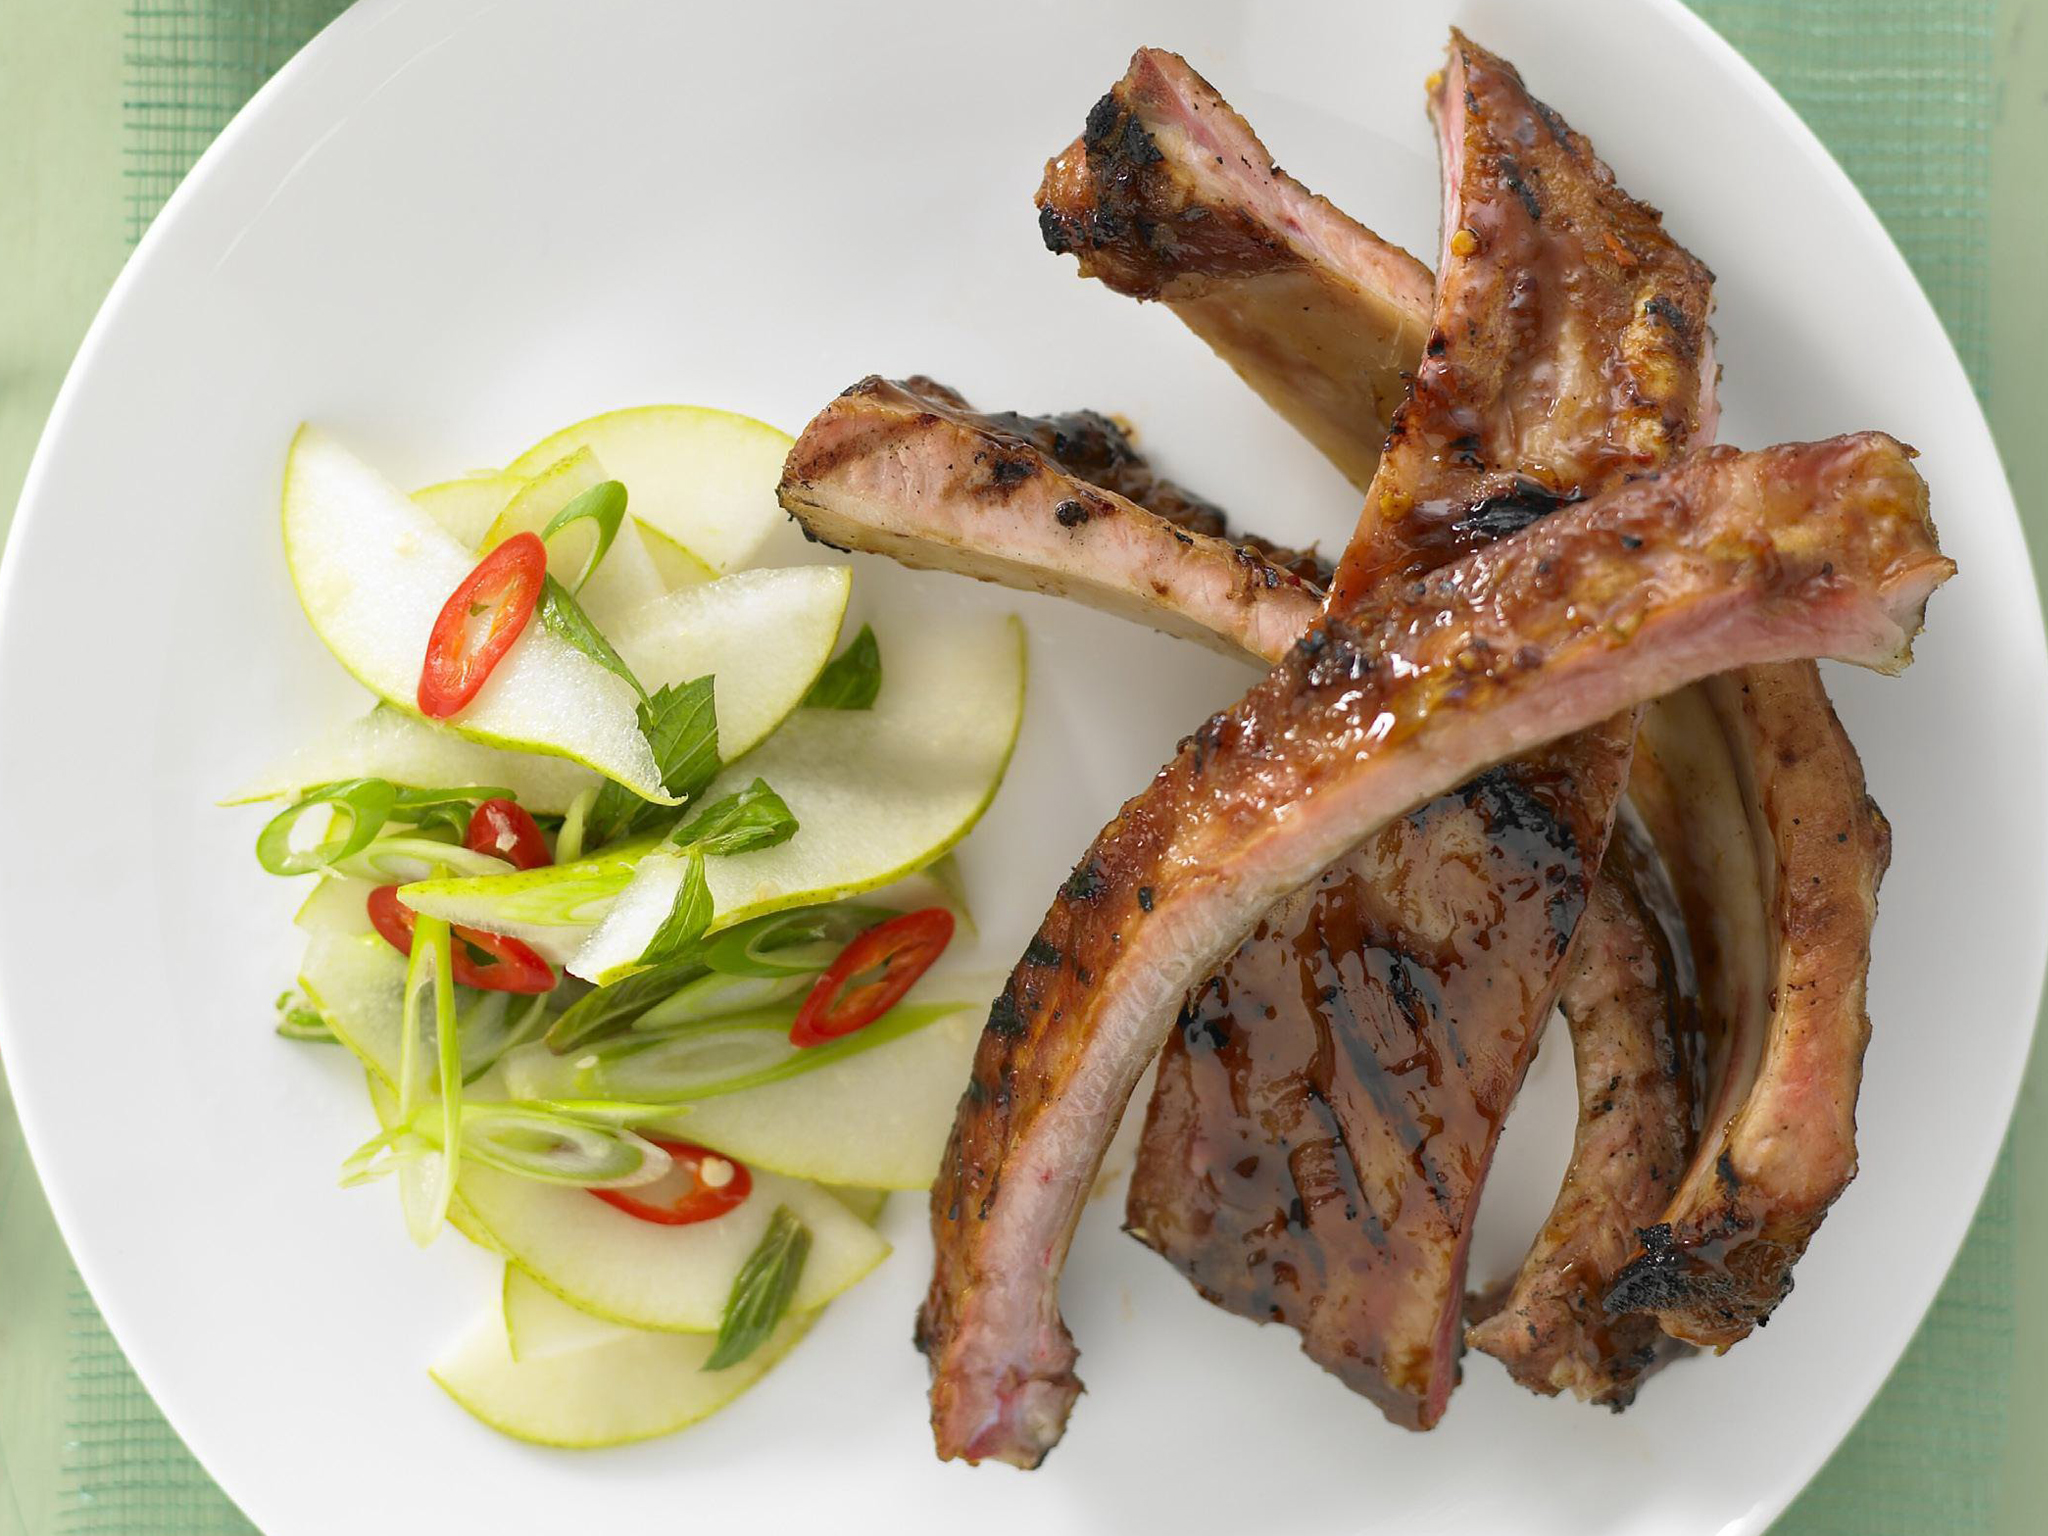 plum and star anise pork spareribs with pear, ginger and chilli salad